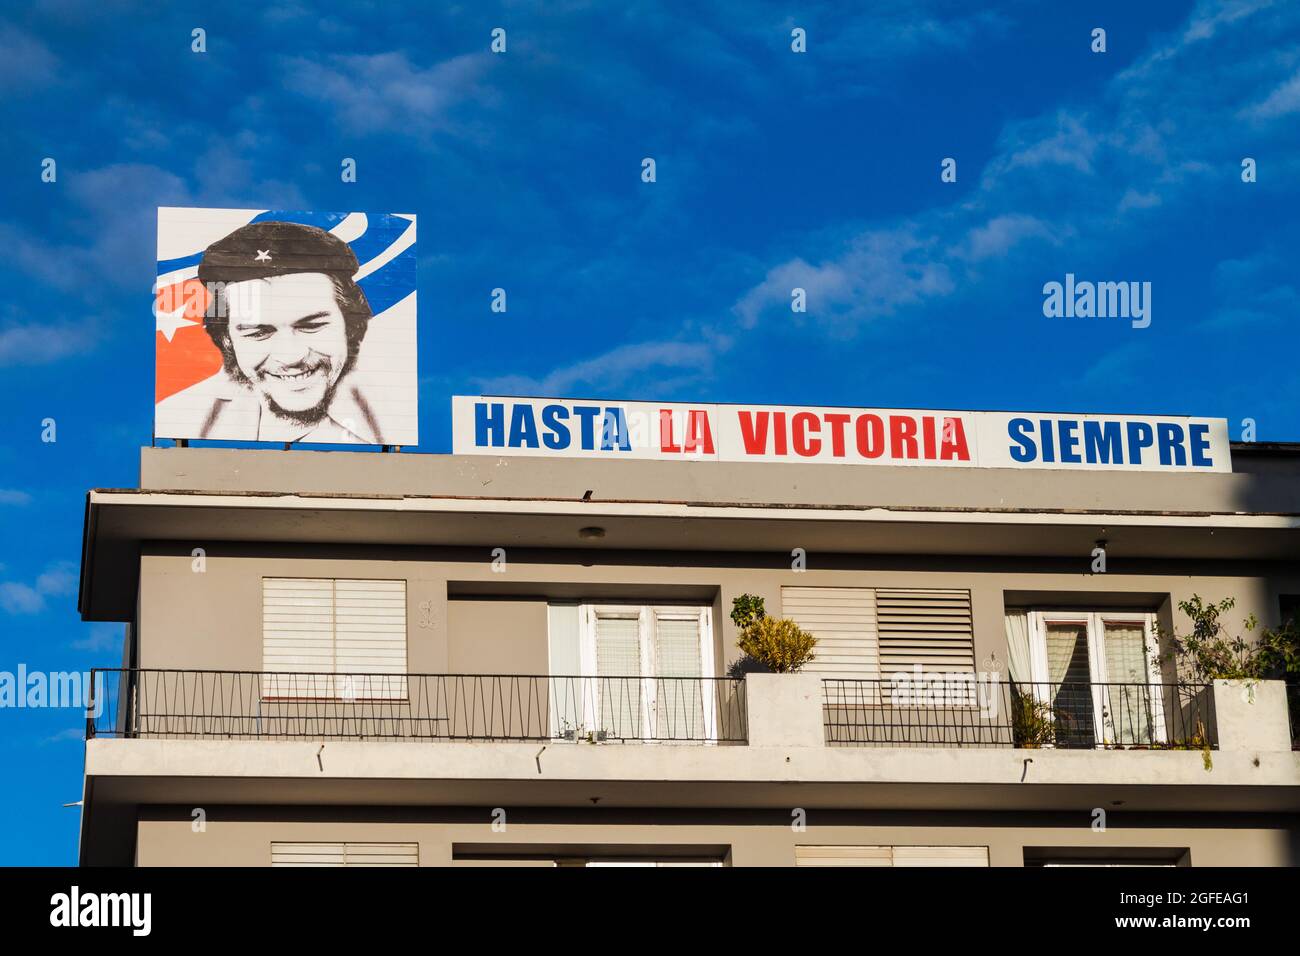 CAMAGUEY, CUBA - JAN 25, 2016: Propagandistic text on the Plaze de los Trabajadores square in the center of Camaguey says: Always to the victory. Stock Photo